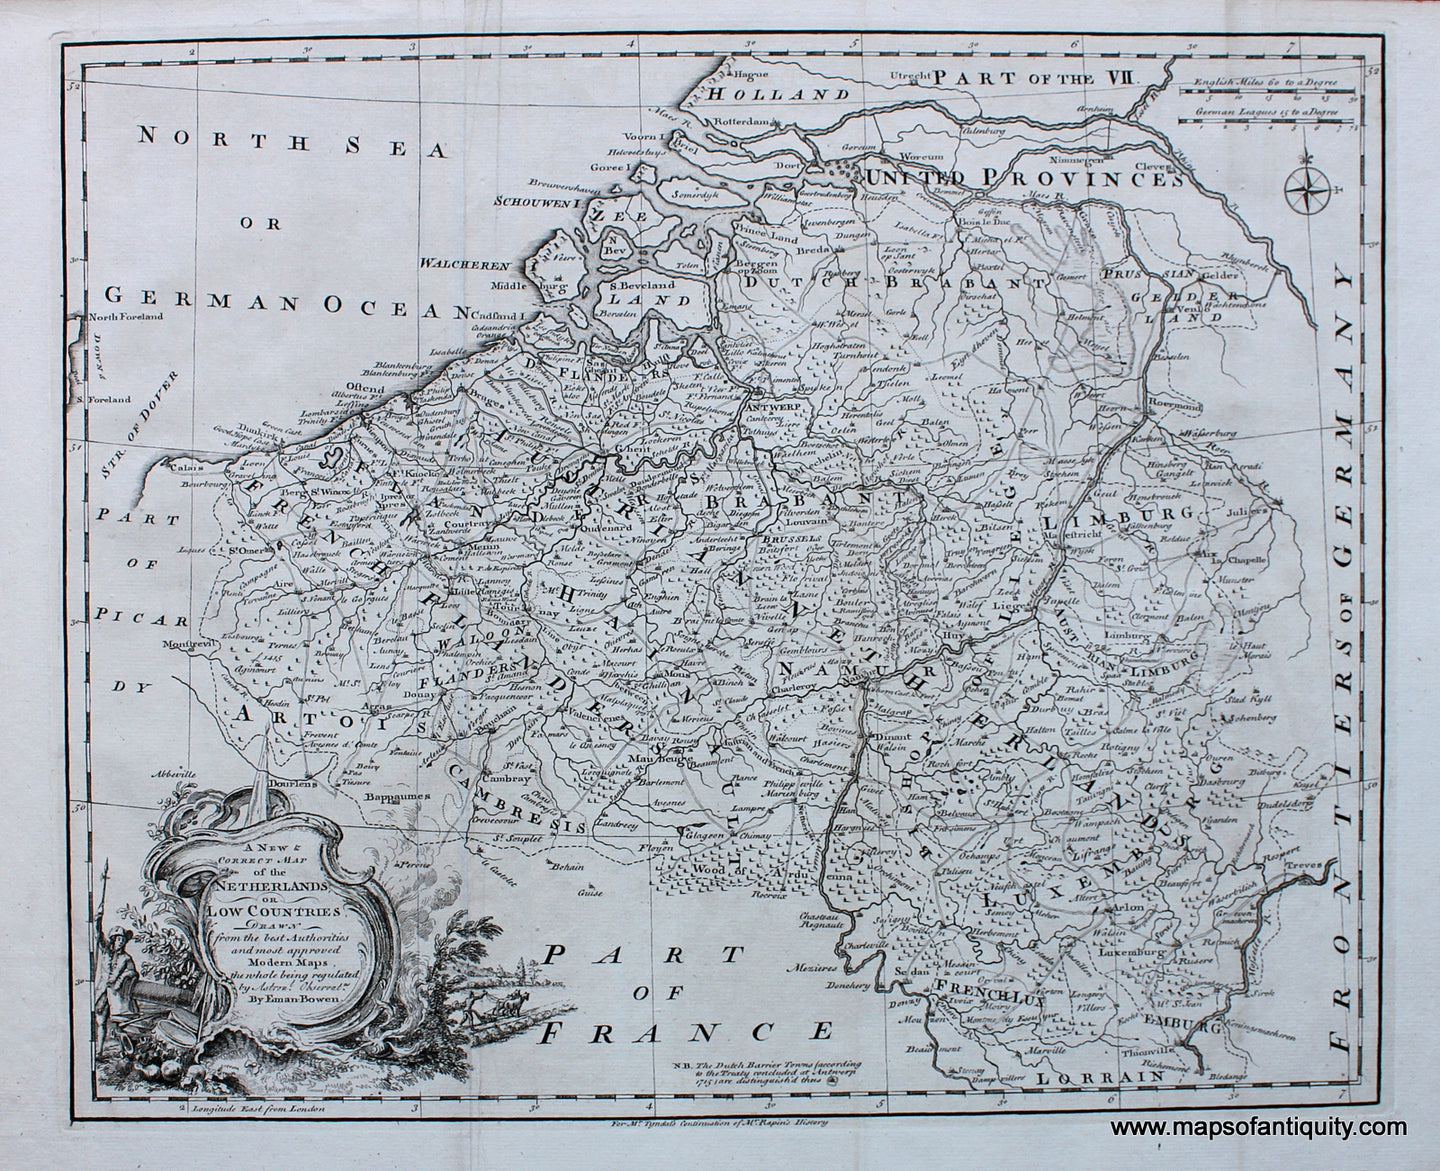 Antique-Map-A-New-&-Correct-map-of-the-Netherlands-or-Low-Countries-Drawn-from-the-best-Authorities-and-most-approved-Modern-Maps-the-whole-being-regulated-by-Astronomical-Observed-by-Eman.-Bowen.